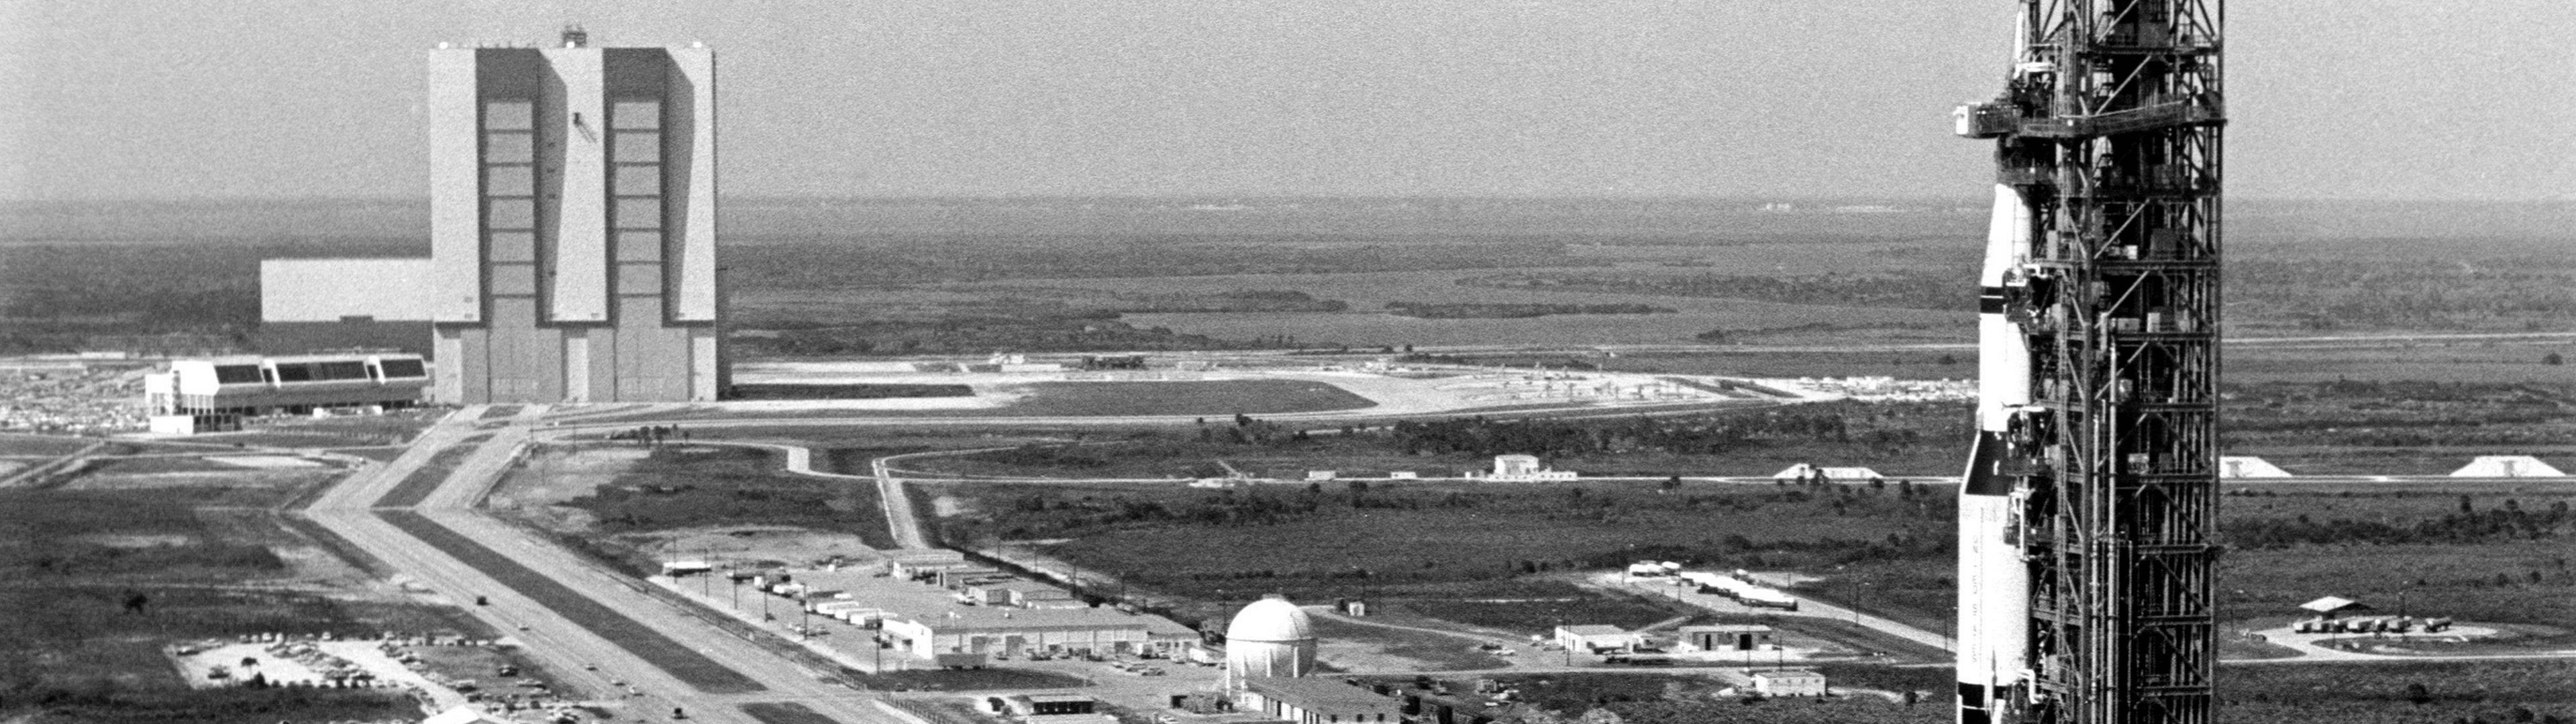 Cape Canaveral Saturn V Launch Pads History Multiple Display 3839x1079